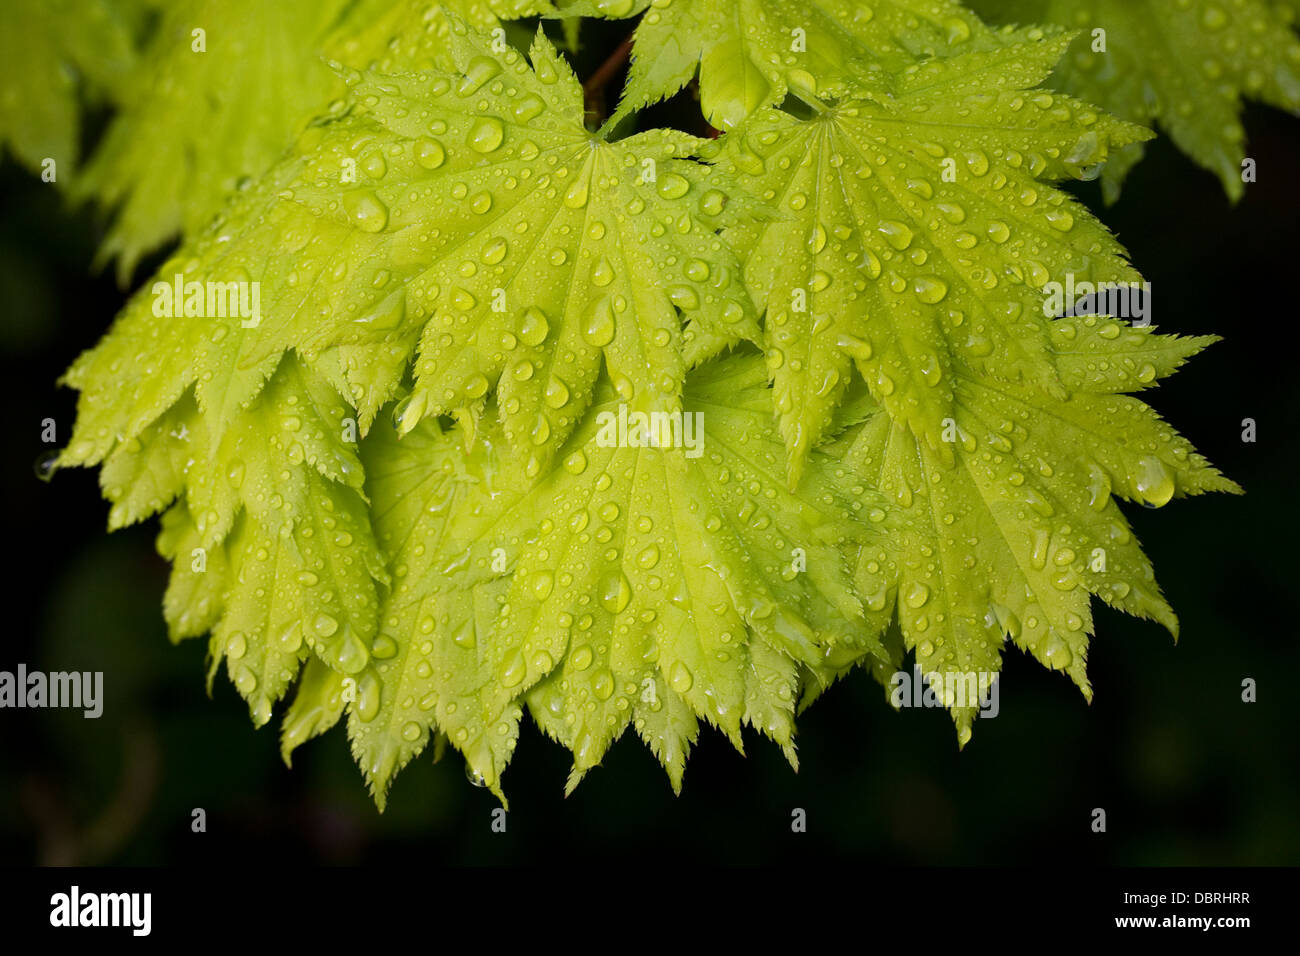 Raindrops on Acer leaves. Stock Photo